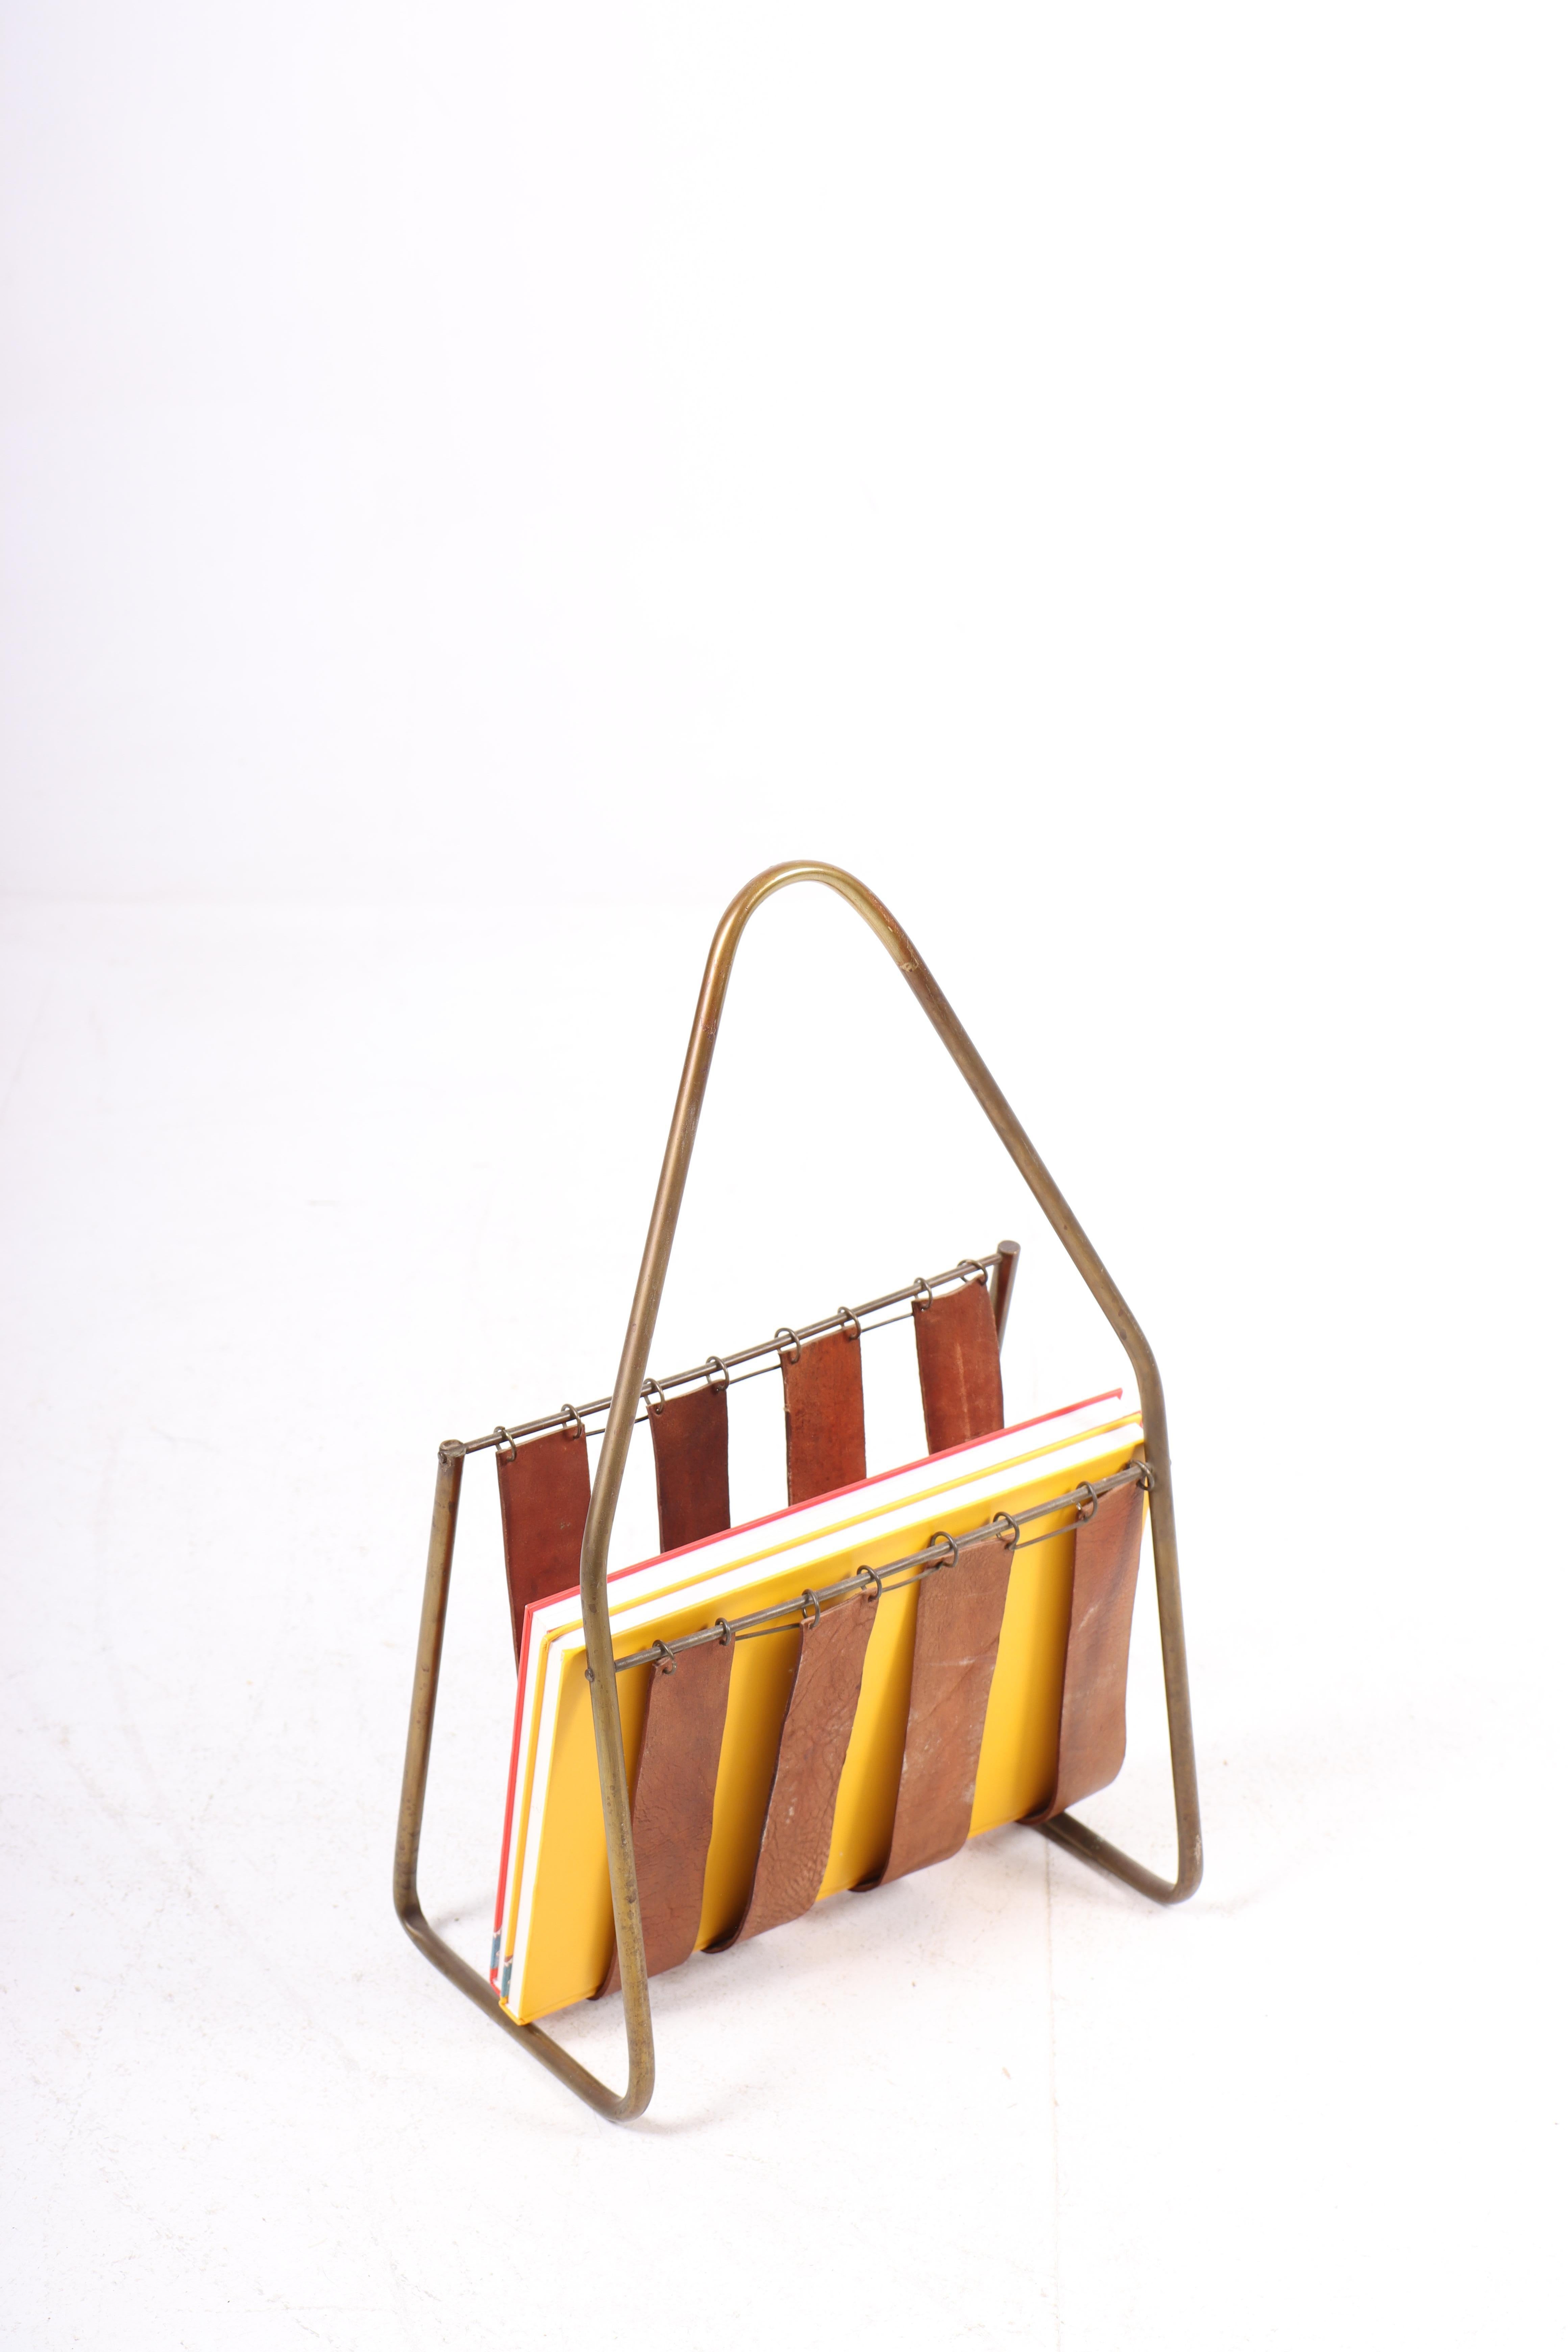 Mid-20th Century Magazine Stand in Patinated Leather and Brass by Illums Bolighus, 1950s For Sale